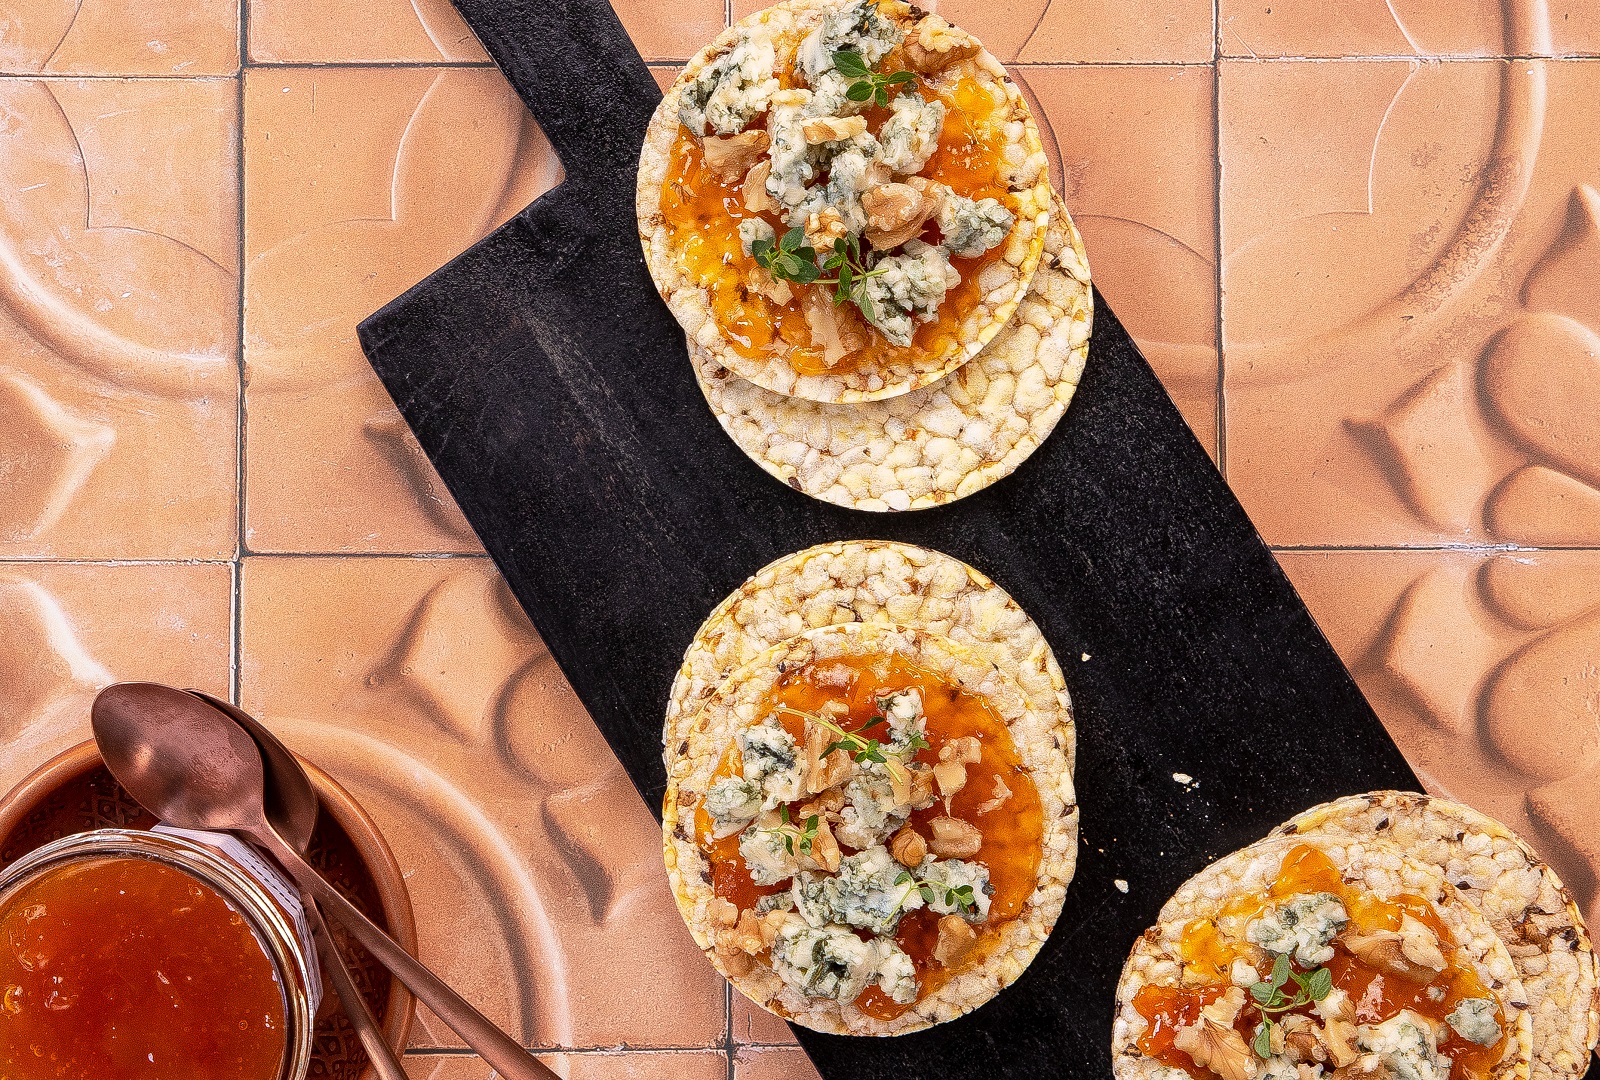 Apricot Conserve, Blue Cheese & Walnut on Corn Thins slices